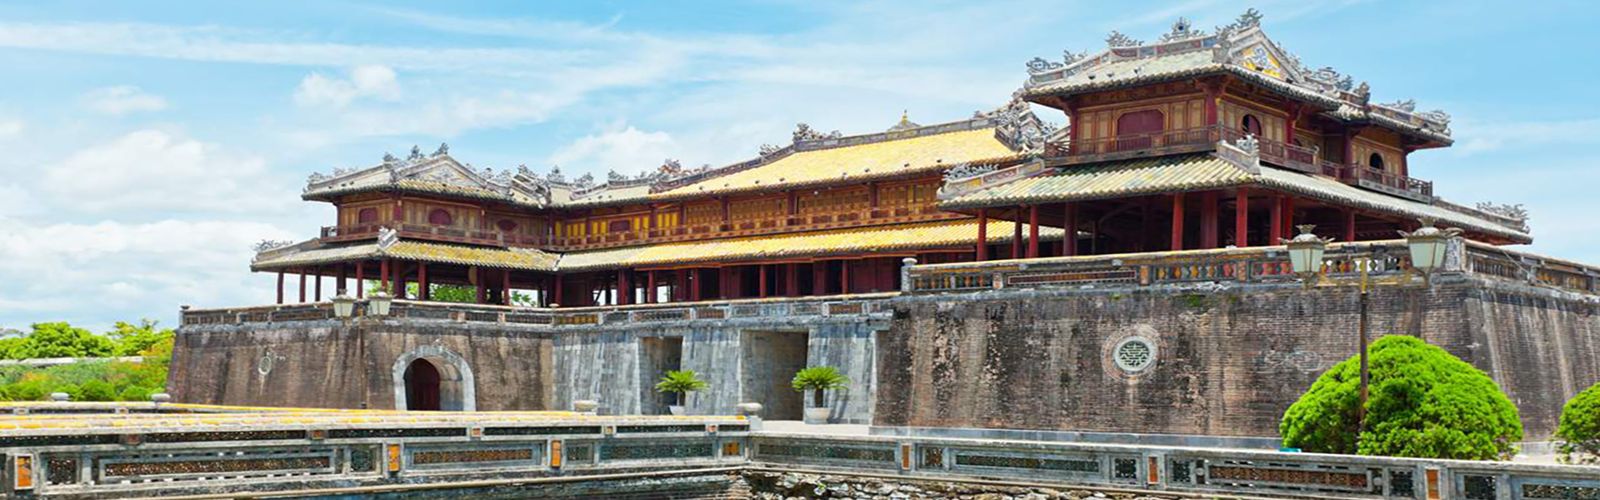 Hue Travel Guide | Asianventure Tours